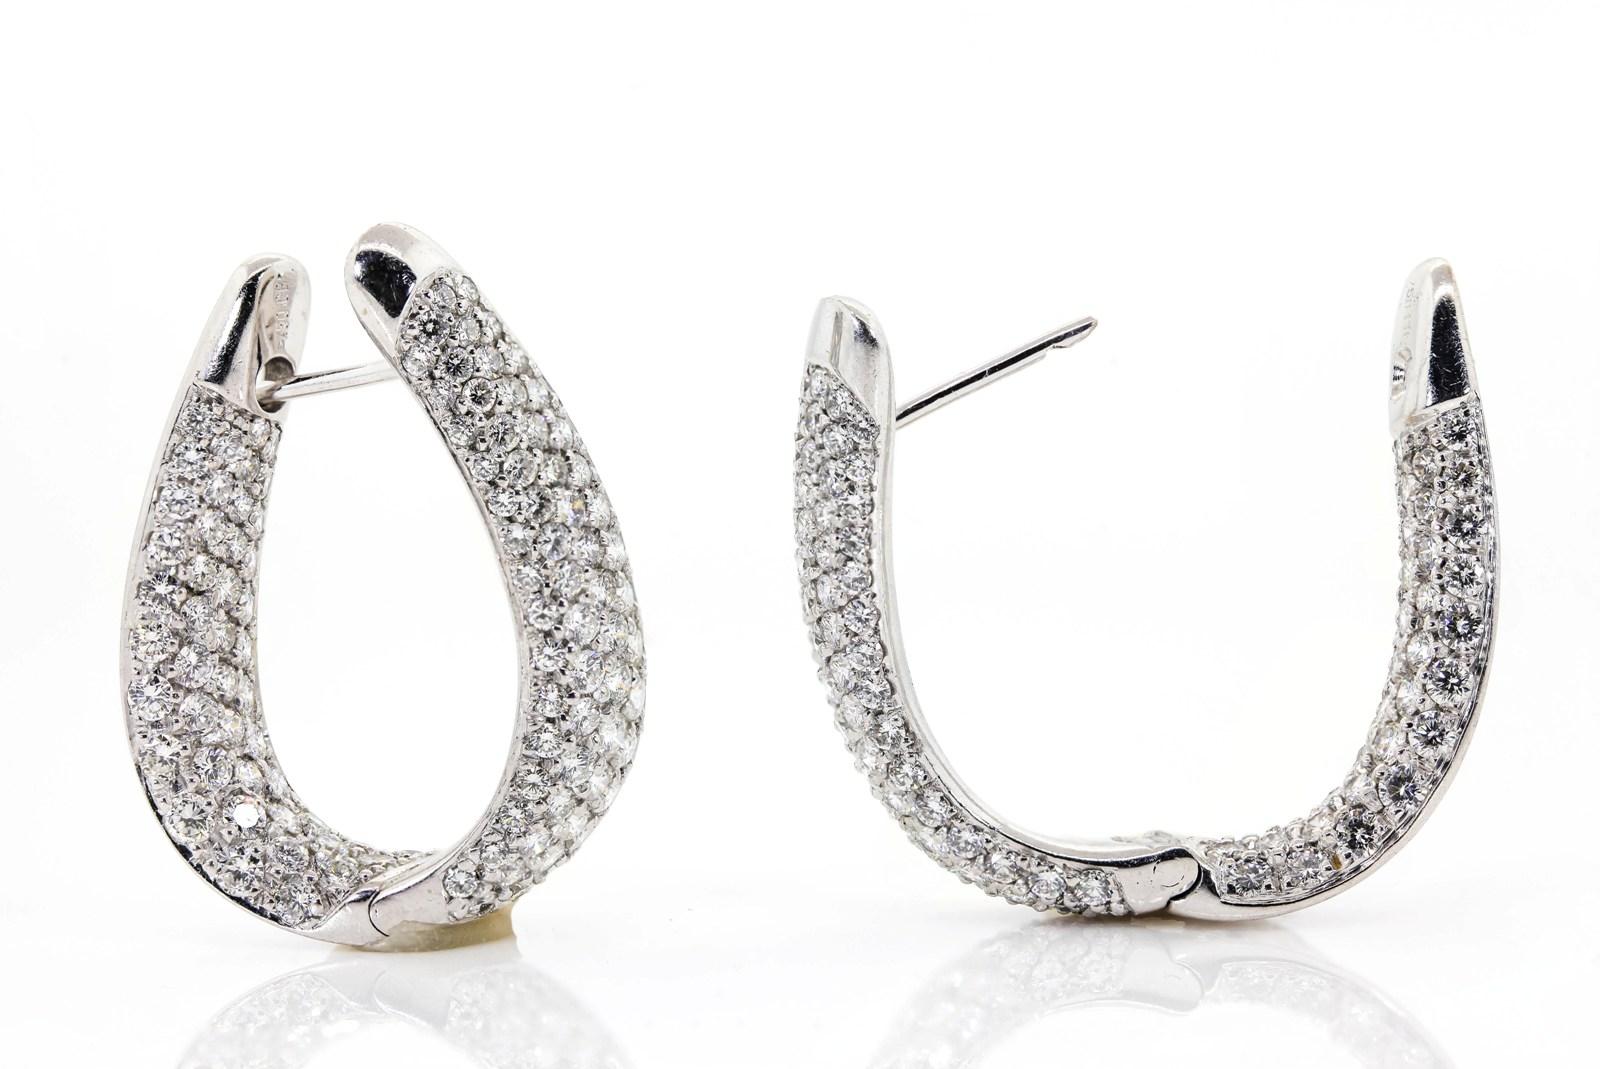 These dazzling elongated hoops are created in 18KT white gold of high brilliant quality.  They are pave set with 6.00 carats of Round Brilliant Cut Diamonds of H/I color - VS clarity.  A hinged closure makes these hoops easy to wear, and the best is